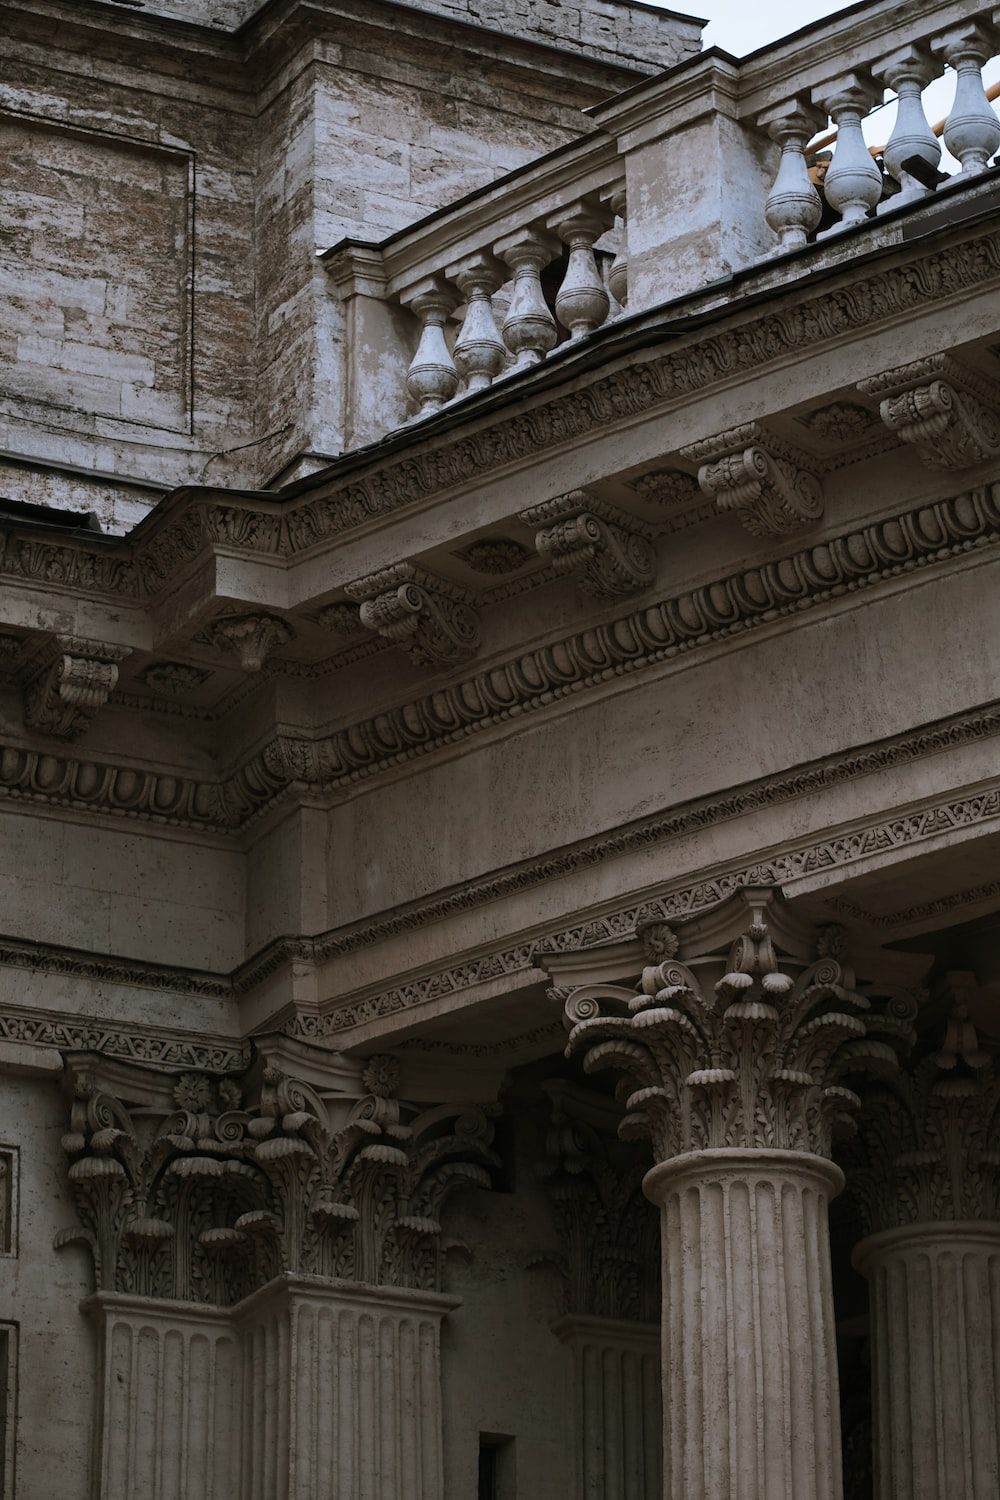 An architectural detail of a building with columns and decorative details. - Architecture